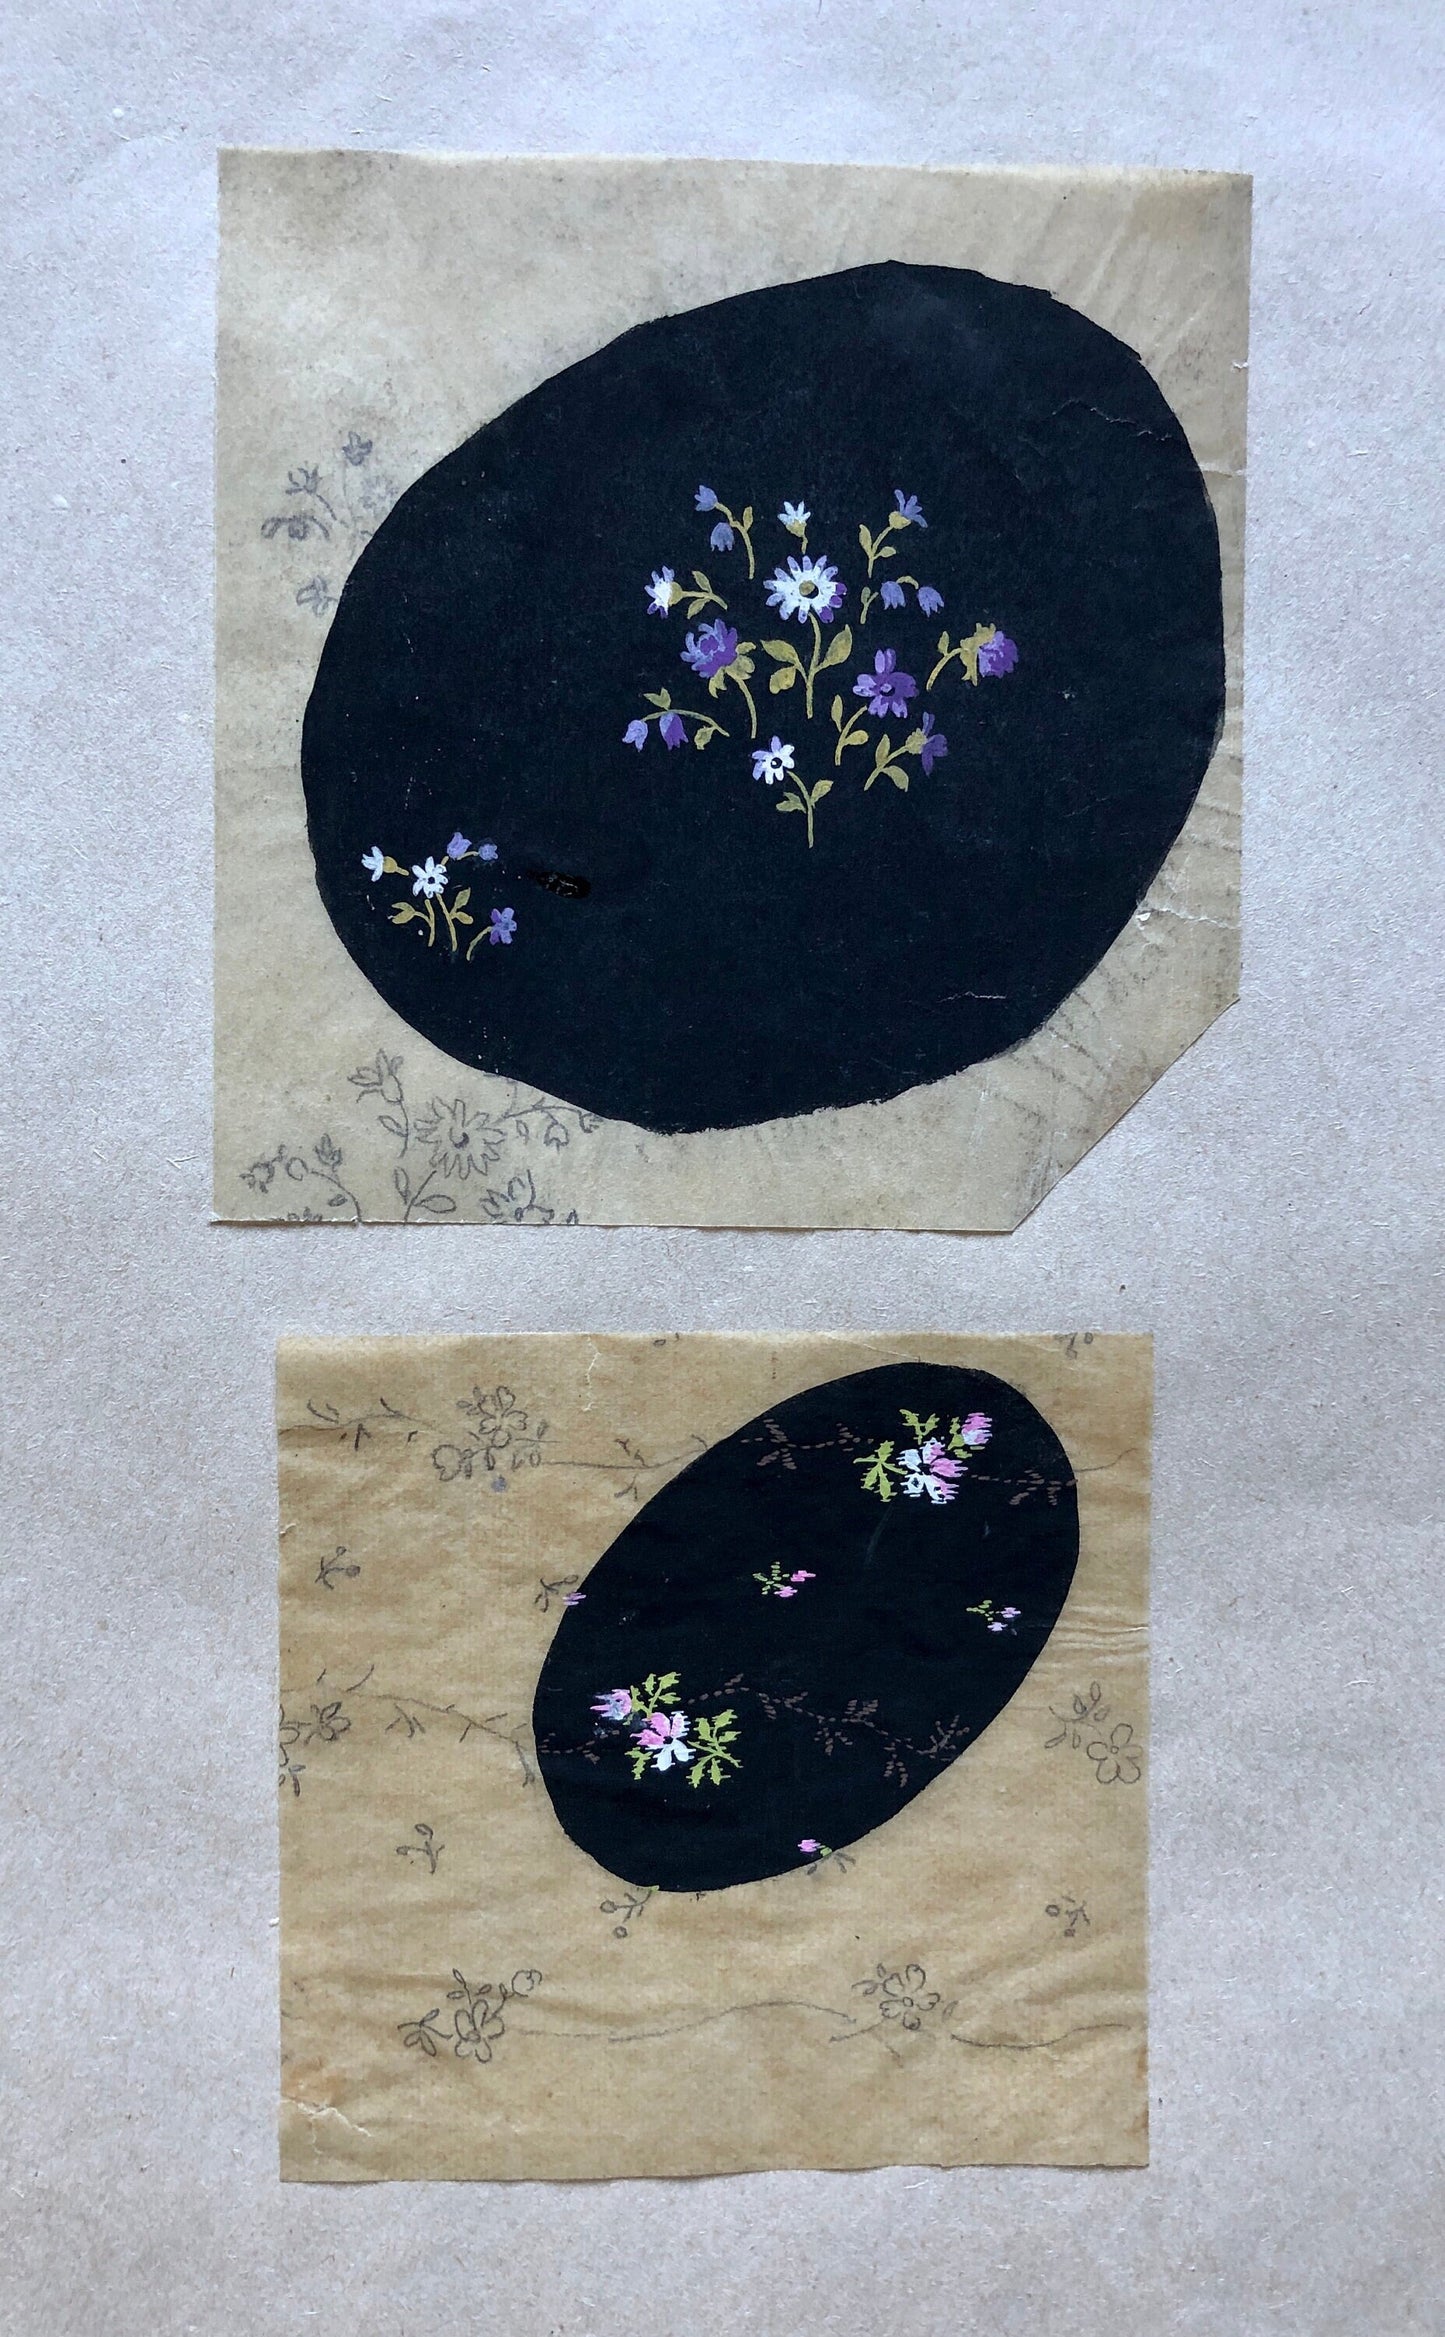 Two Original Hand Painted Antique French Textile Designs. Produced in Lyon in 1911. Size: 9 x 8.7 cms and 7.2 x 7.4 cms.